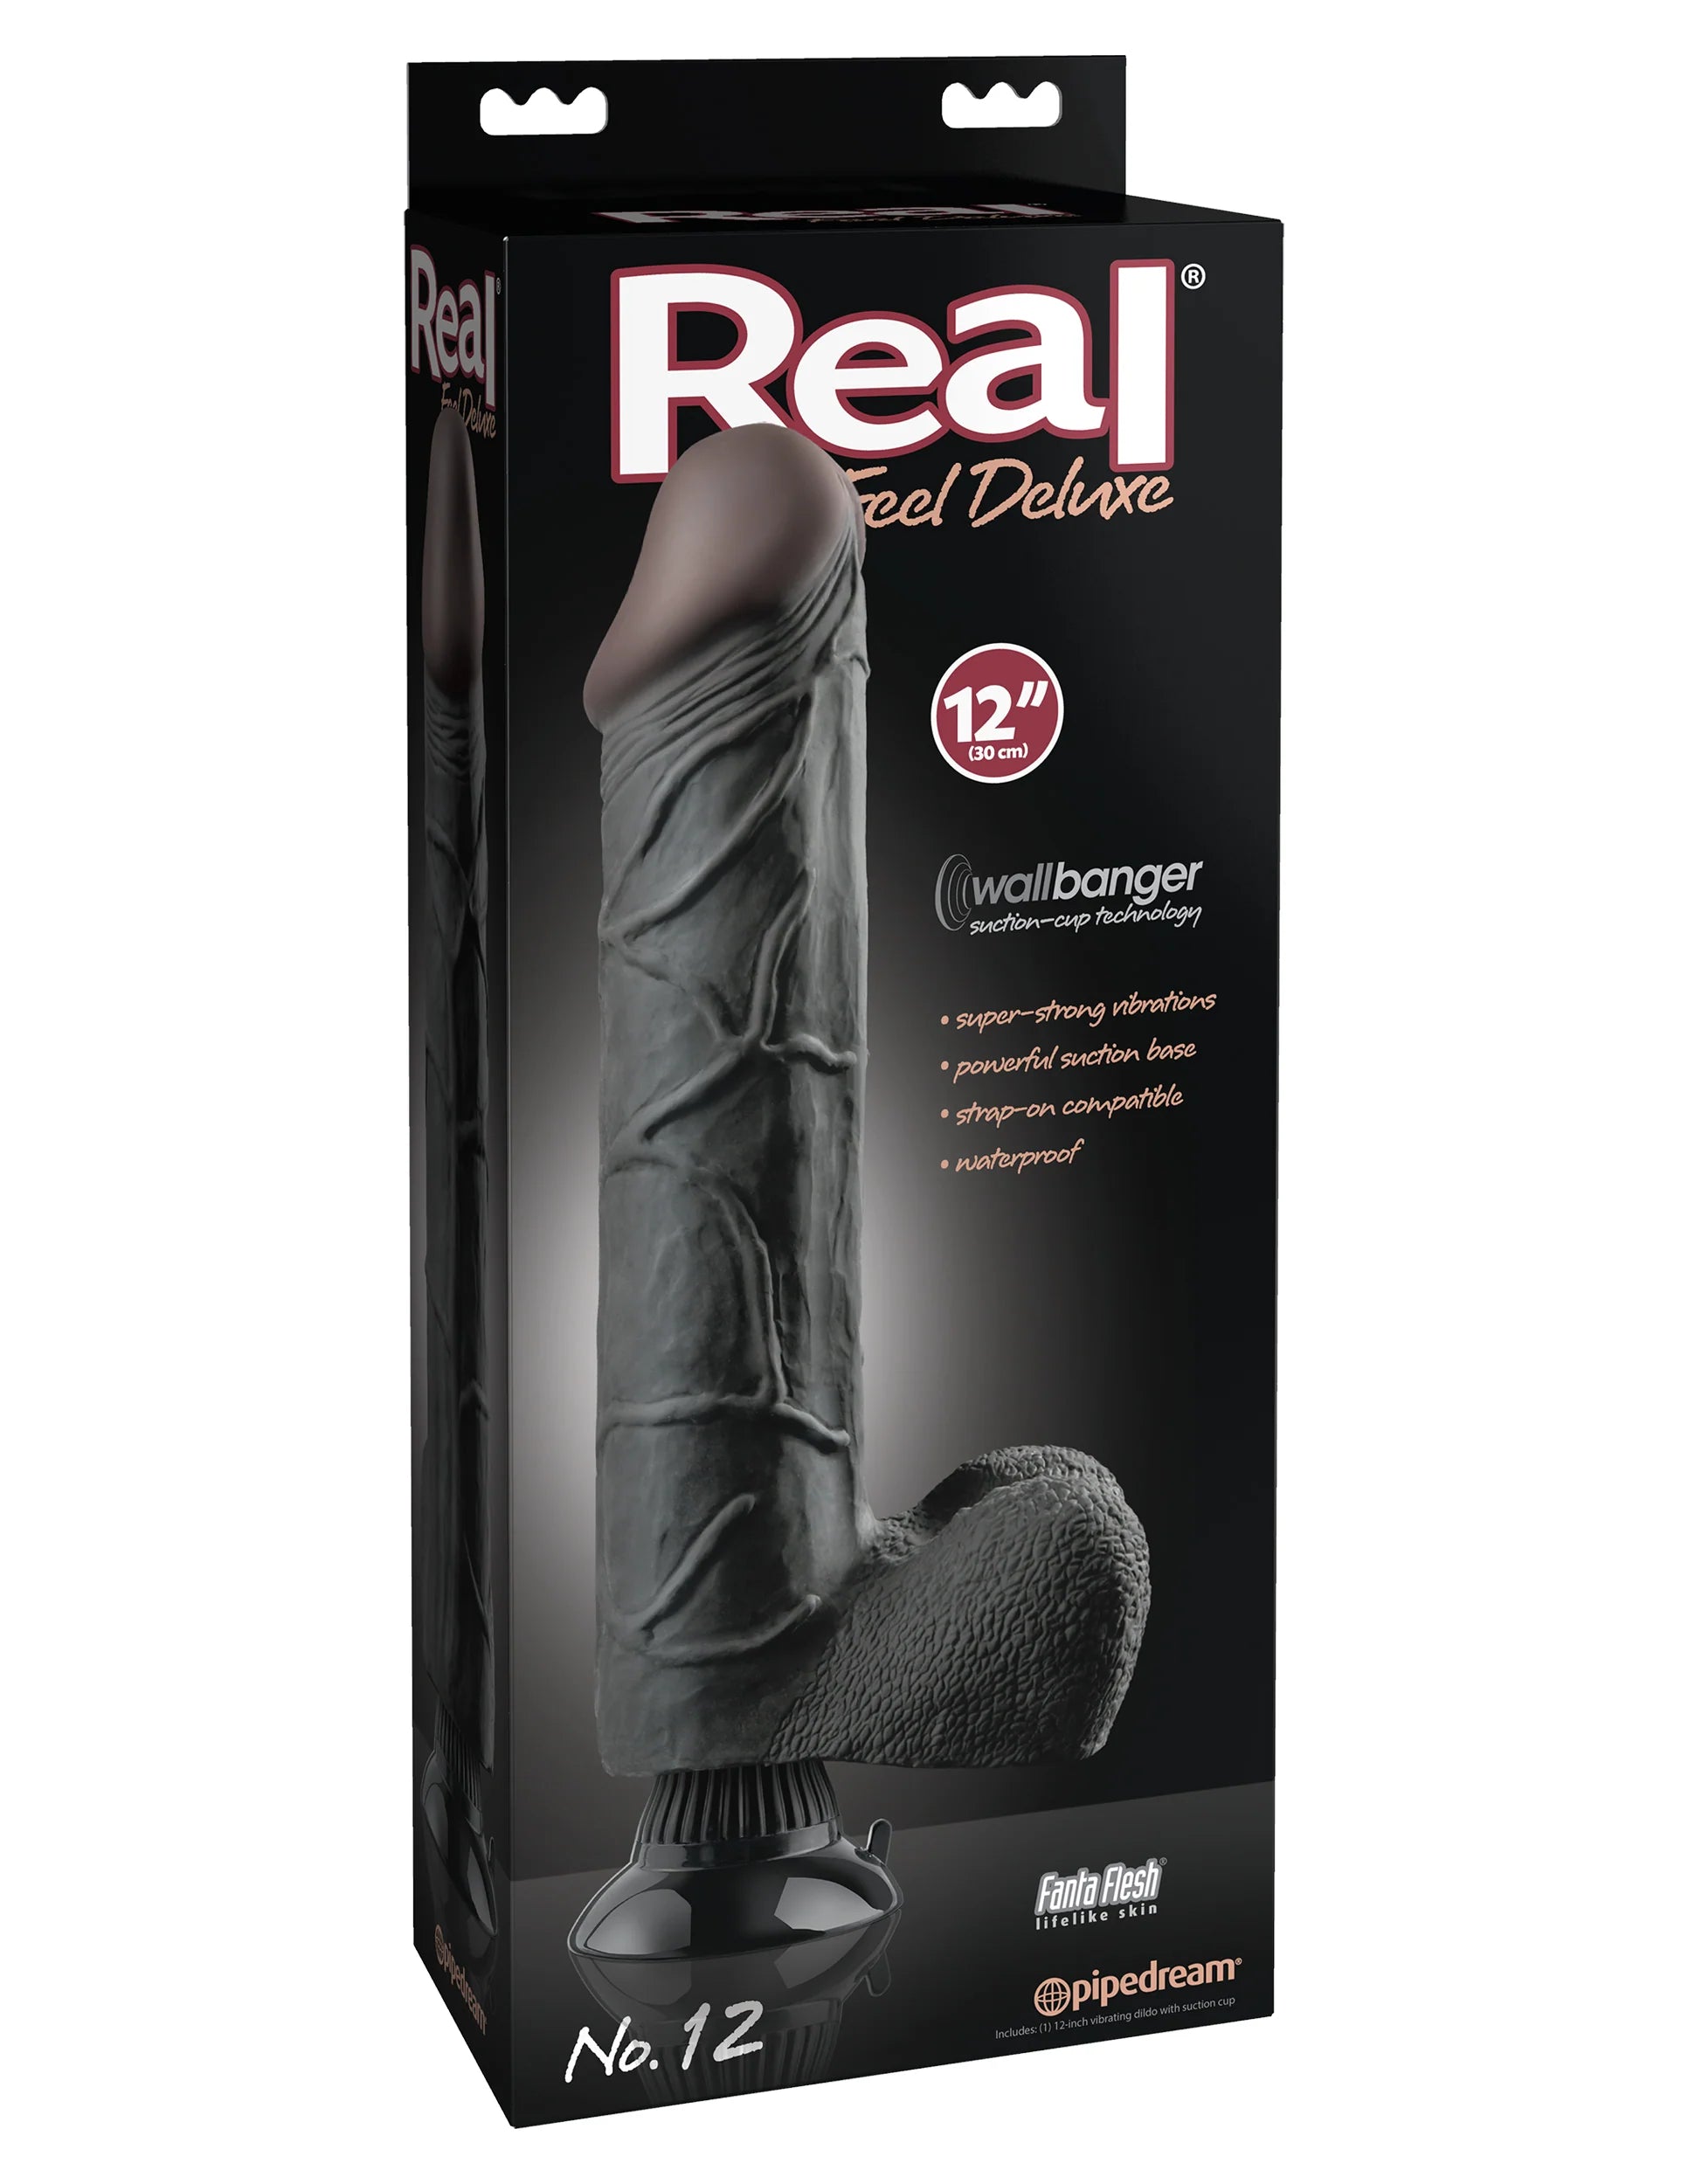 Pipedream Real Feel Deluxe No. 12 Realistic 12 in. Vibrating Dildo With Balls and Suction Cup